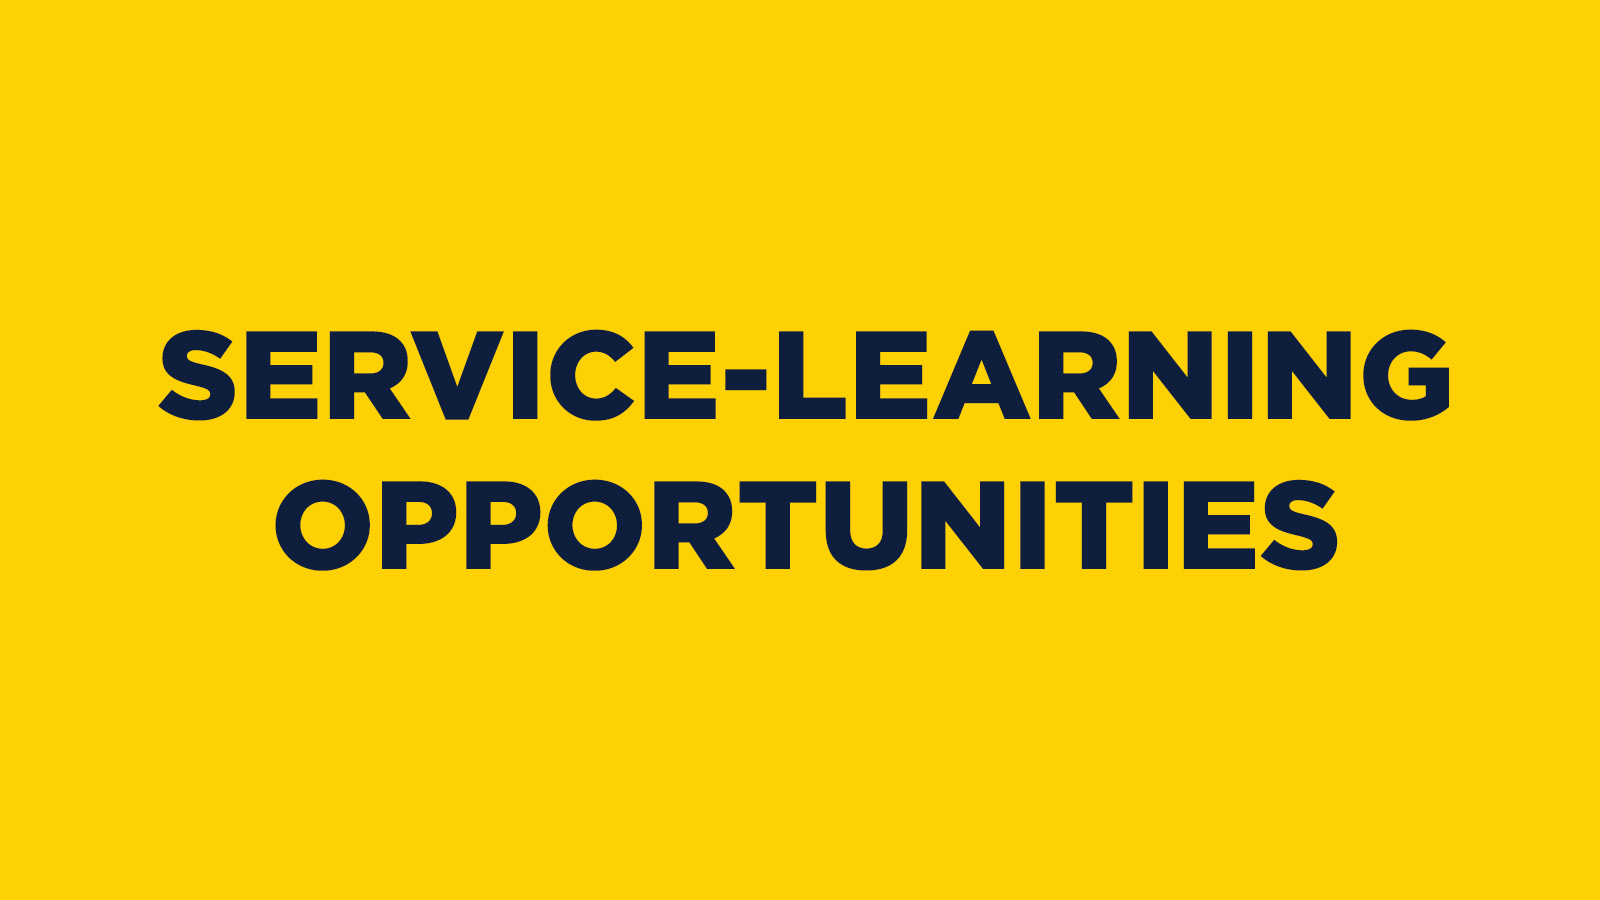 SERVICE-LEARNING OPPORTUNITIES